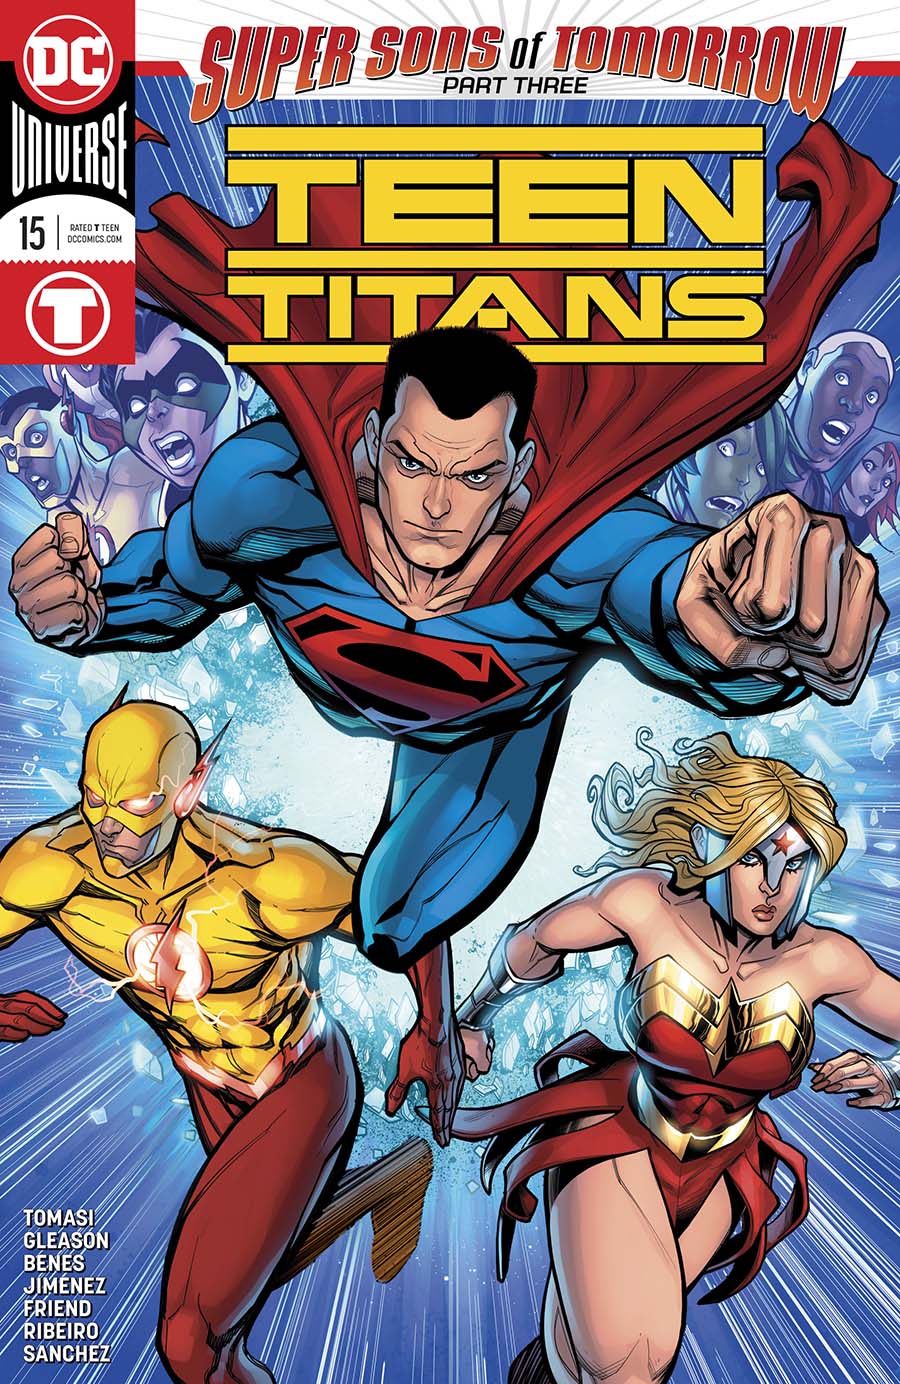 Teen Titans Vol 6 #15 Cover B Variant Chad Hardin Cover (Super Sons Of Tomorrow Part 3)